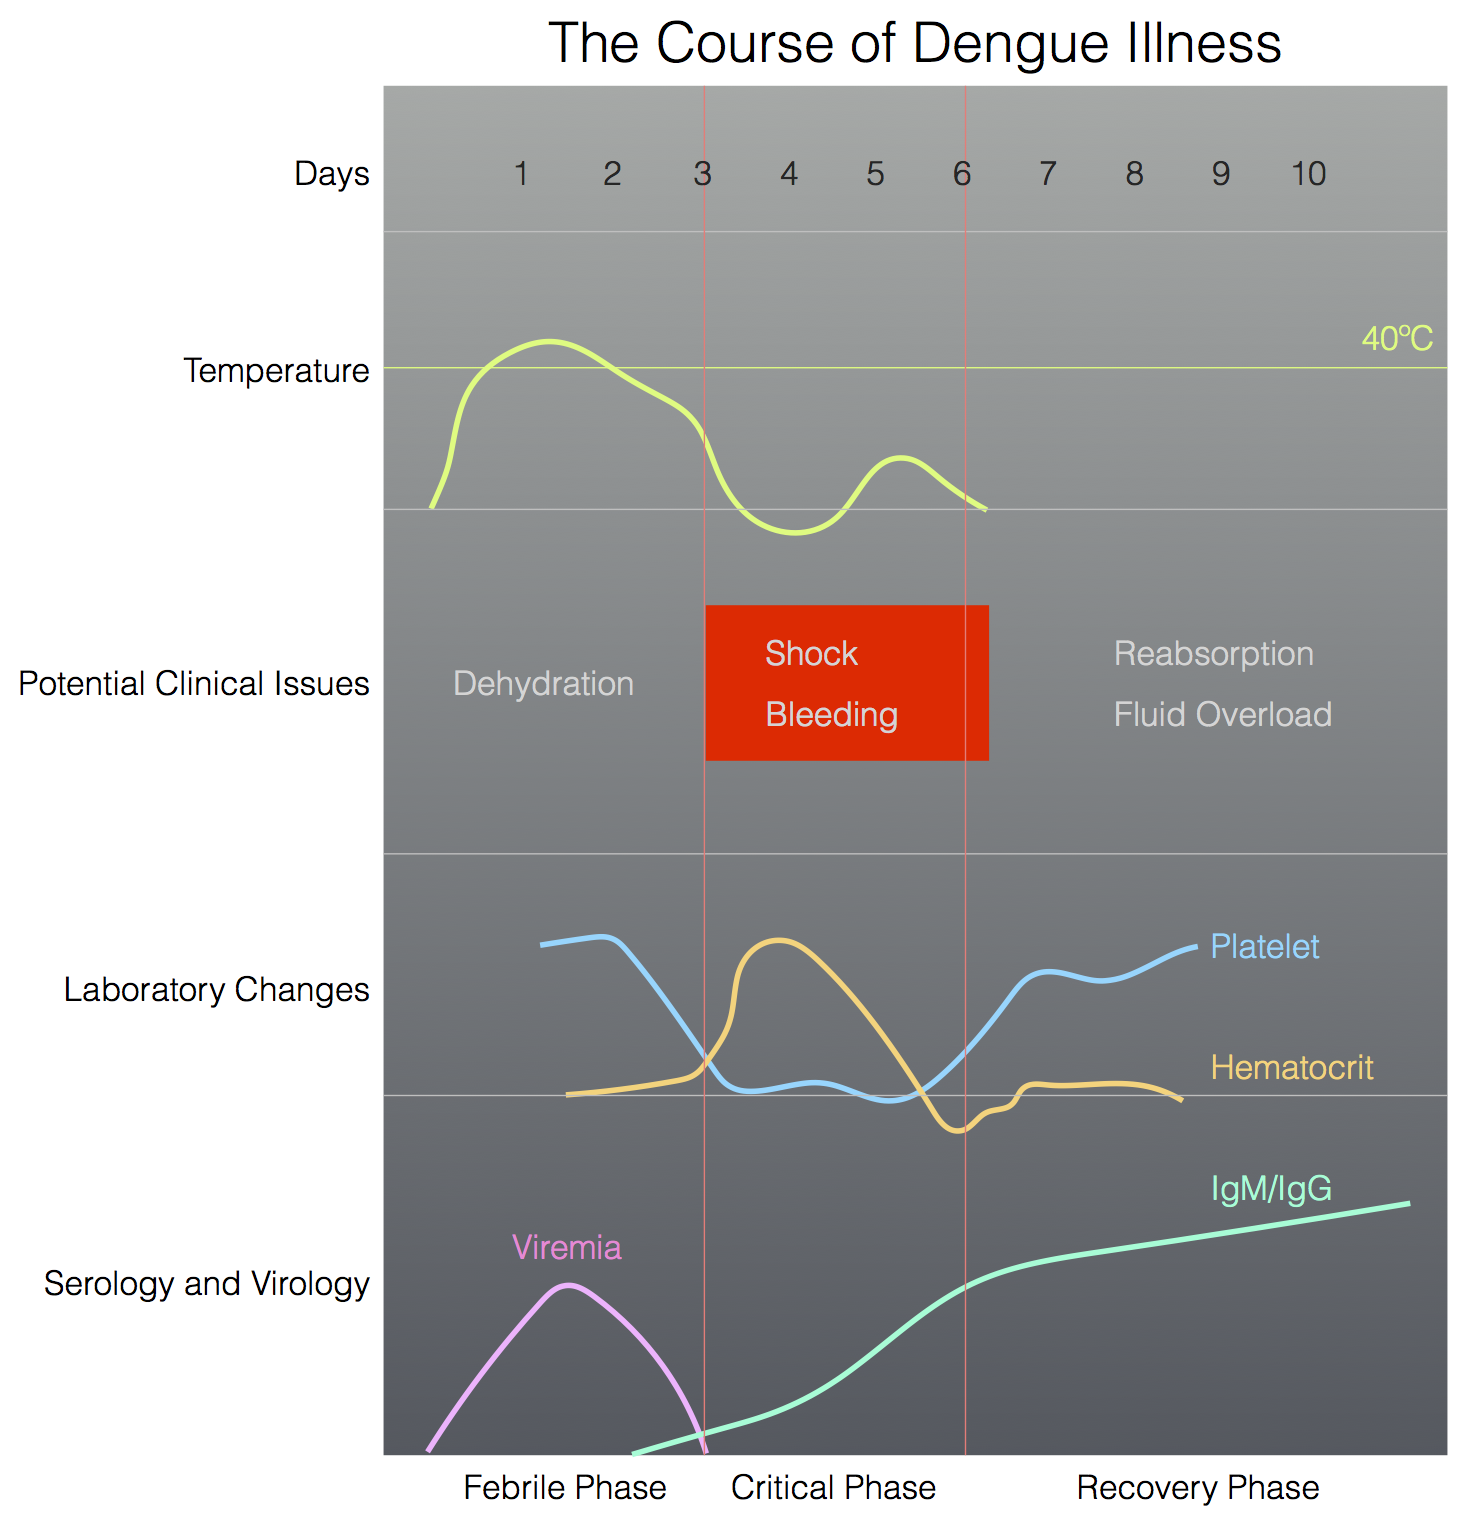 File:The course of dengue illness.png